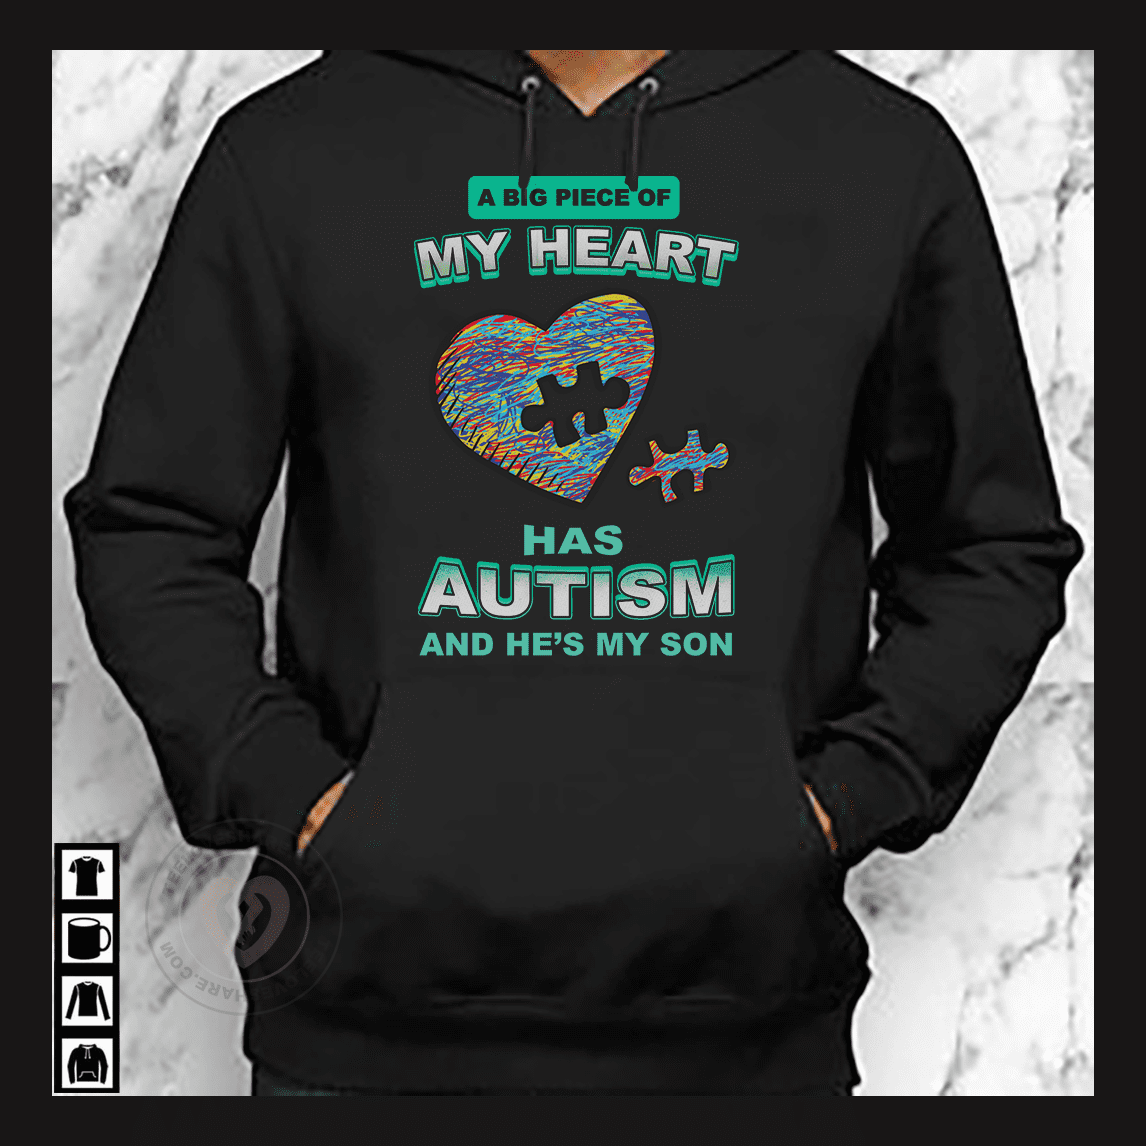 A big piece of my heart has autism and he's my son - Autism awareness, autism family